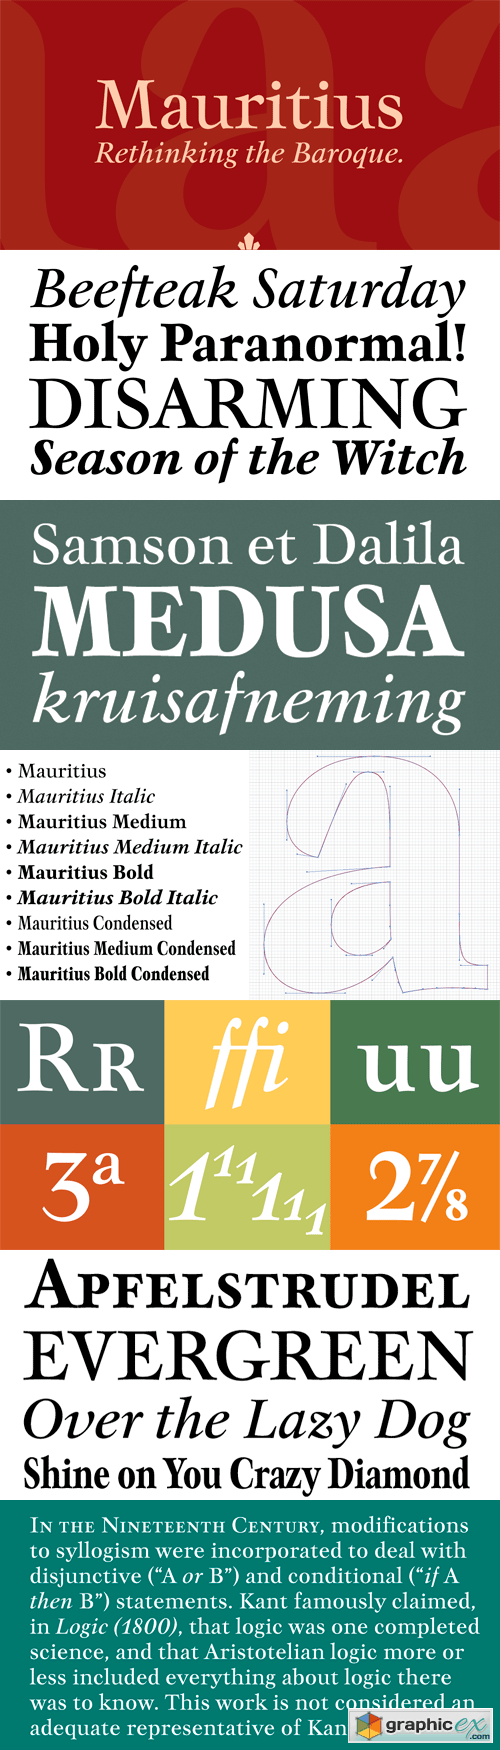 Mauritius Font Family - 9 Fonts for $150